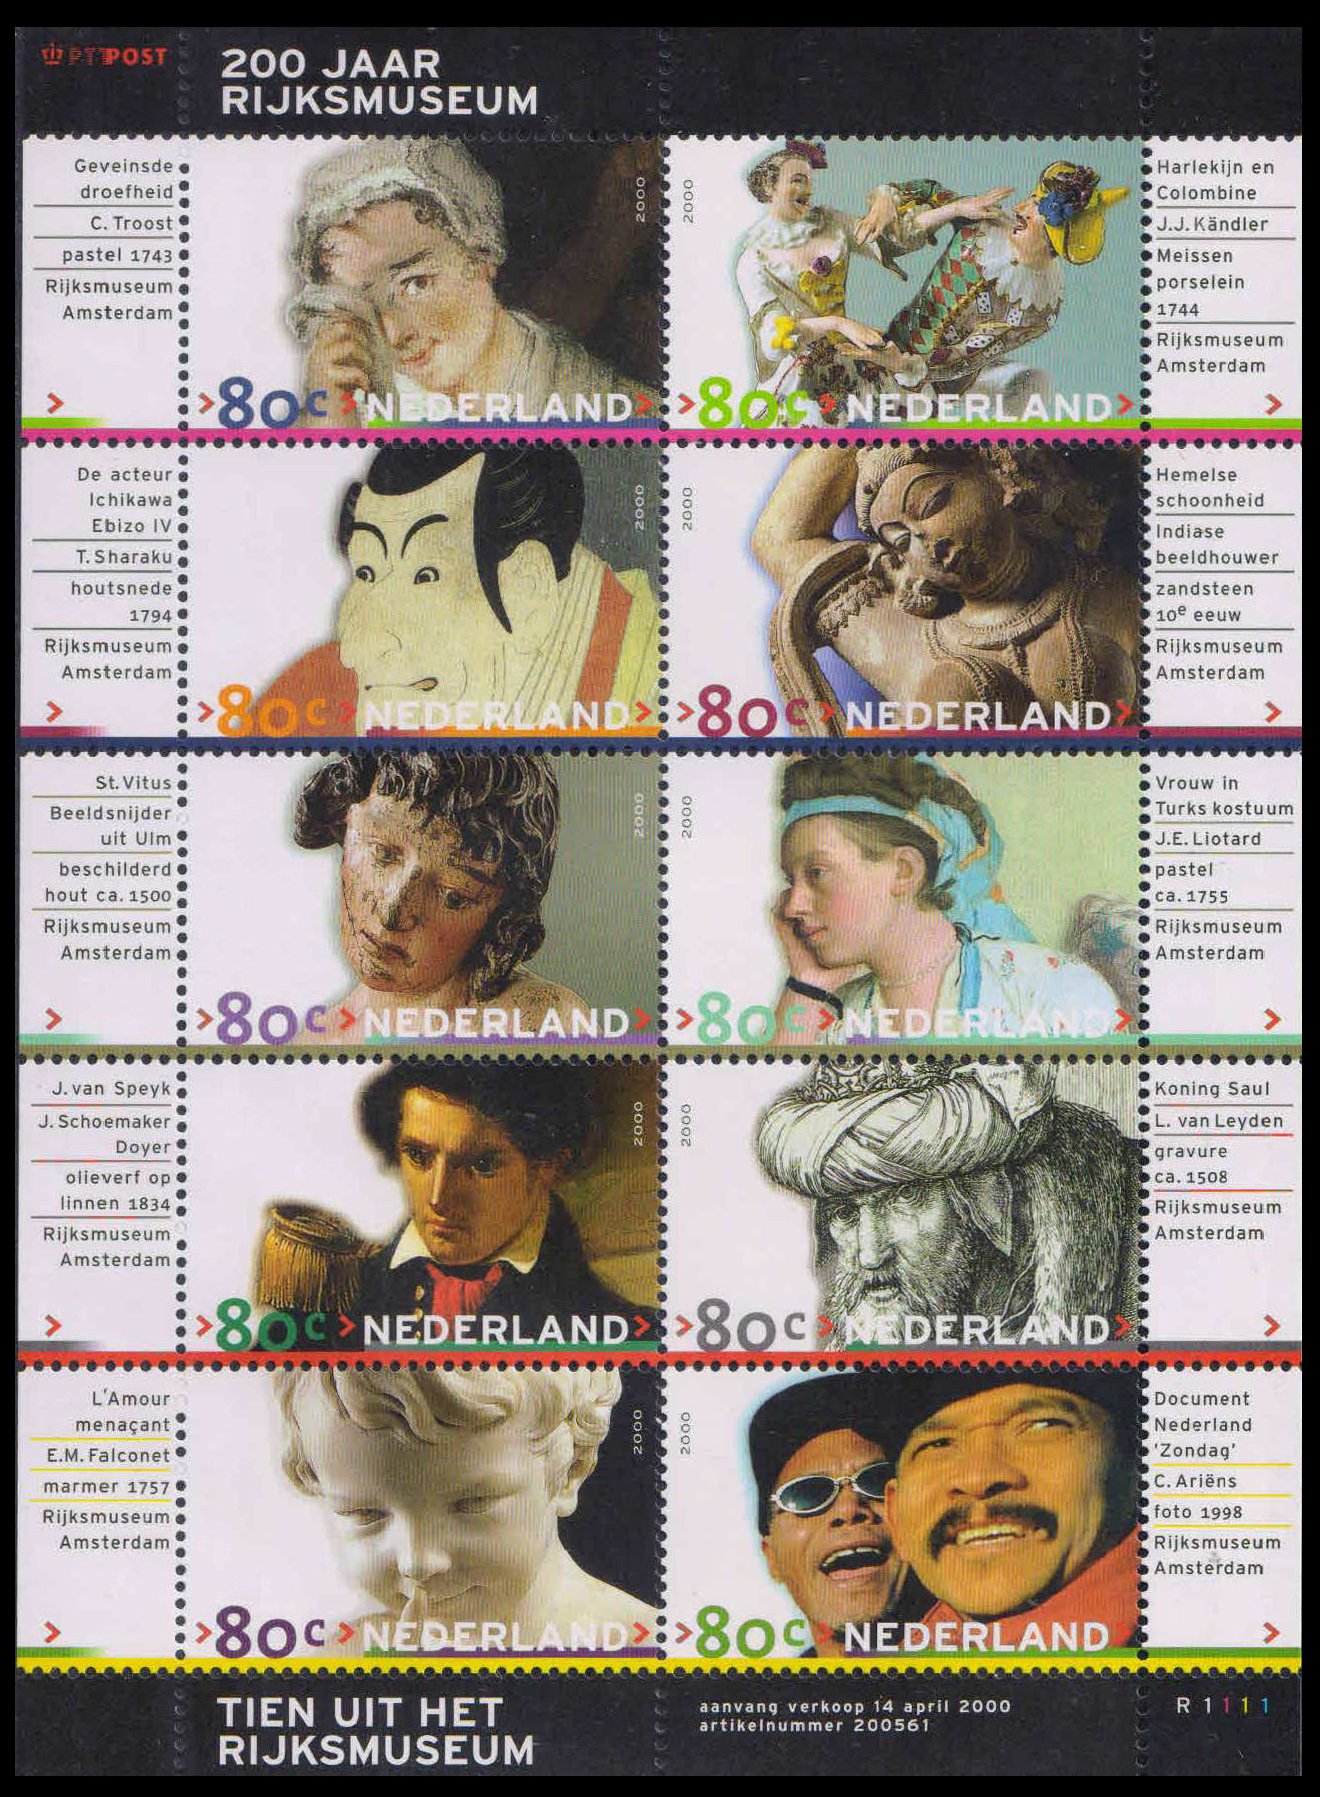 NETHERLAND 2000-Bicentenary of the Rijksmuseum, Amsterdam, Indian Theme Heavenly Beauty (Sandstone Sculpture), Sheetlet of 10, MNH, S.G. 2019-2028-Cat £ 22-